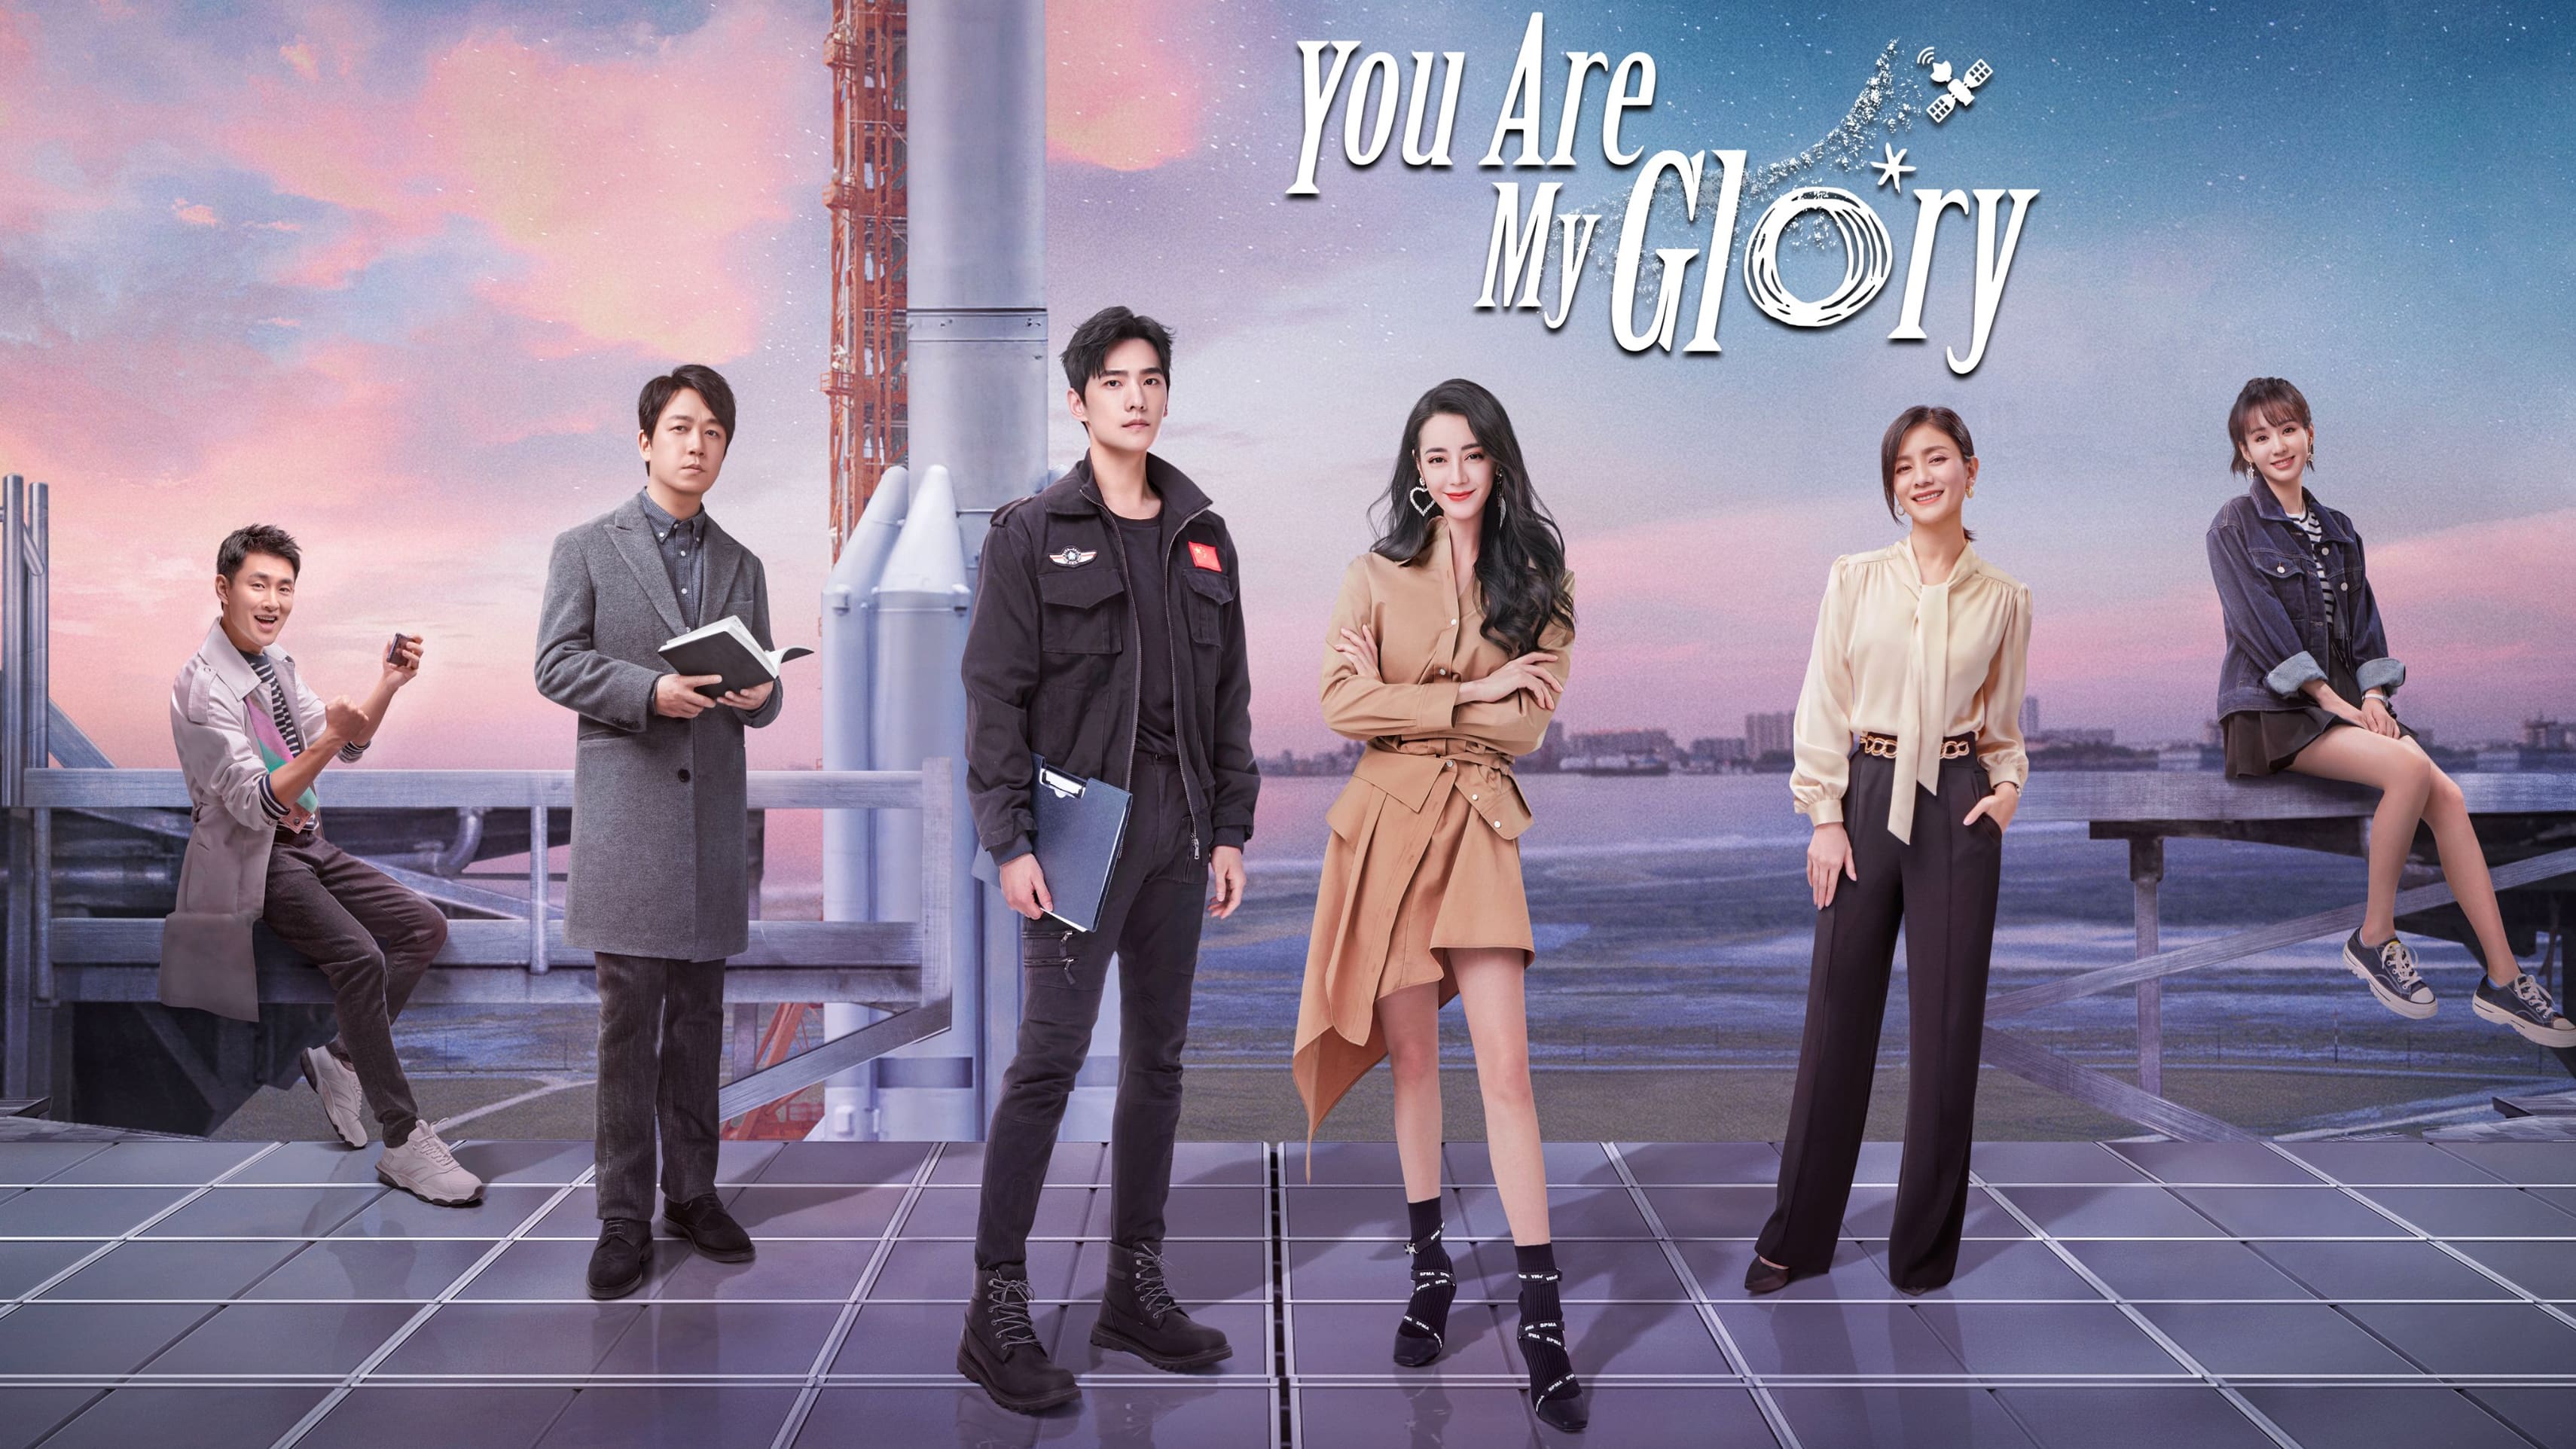 You Are My Glory - Latest Updates on Release Date, Cast, and Plot in 2022